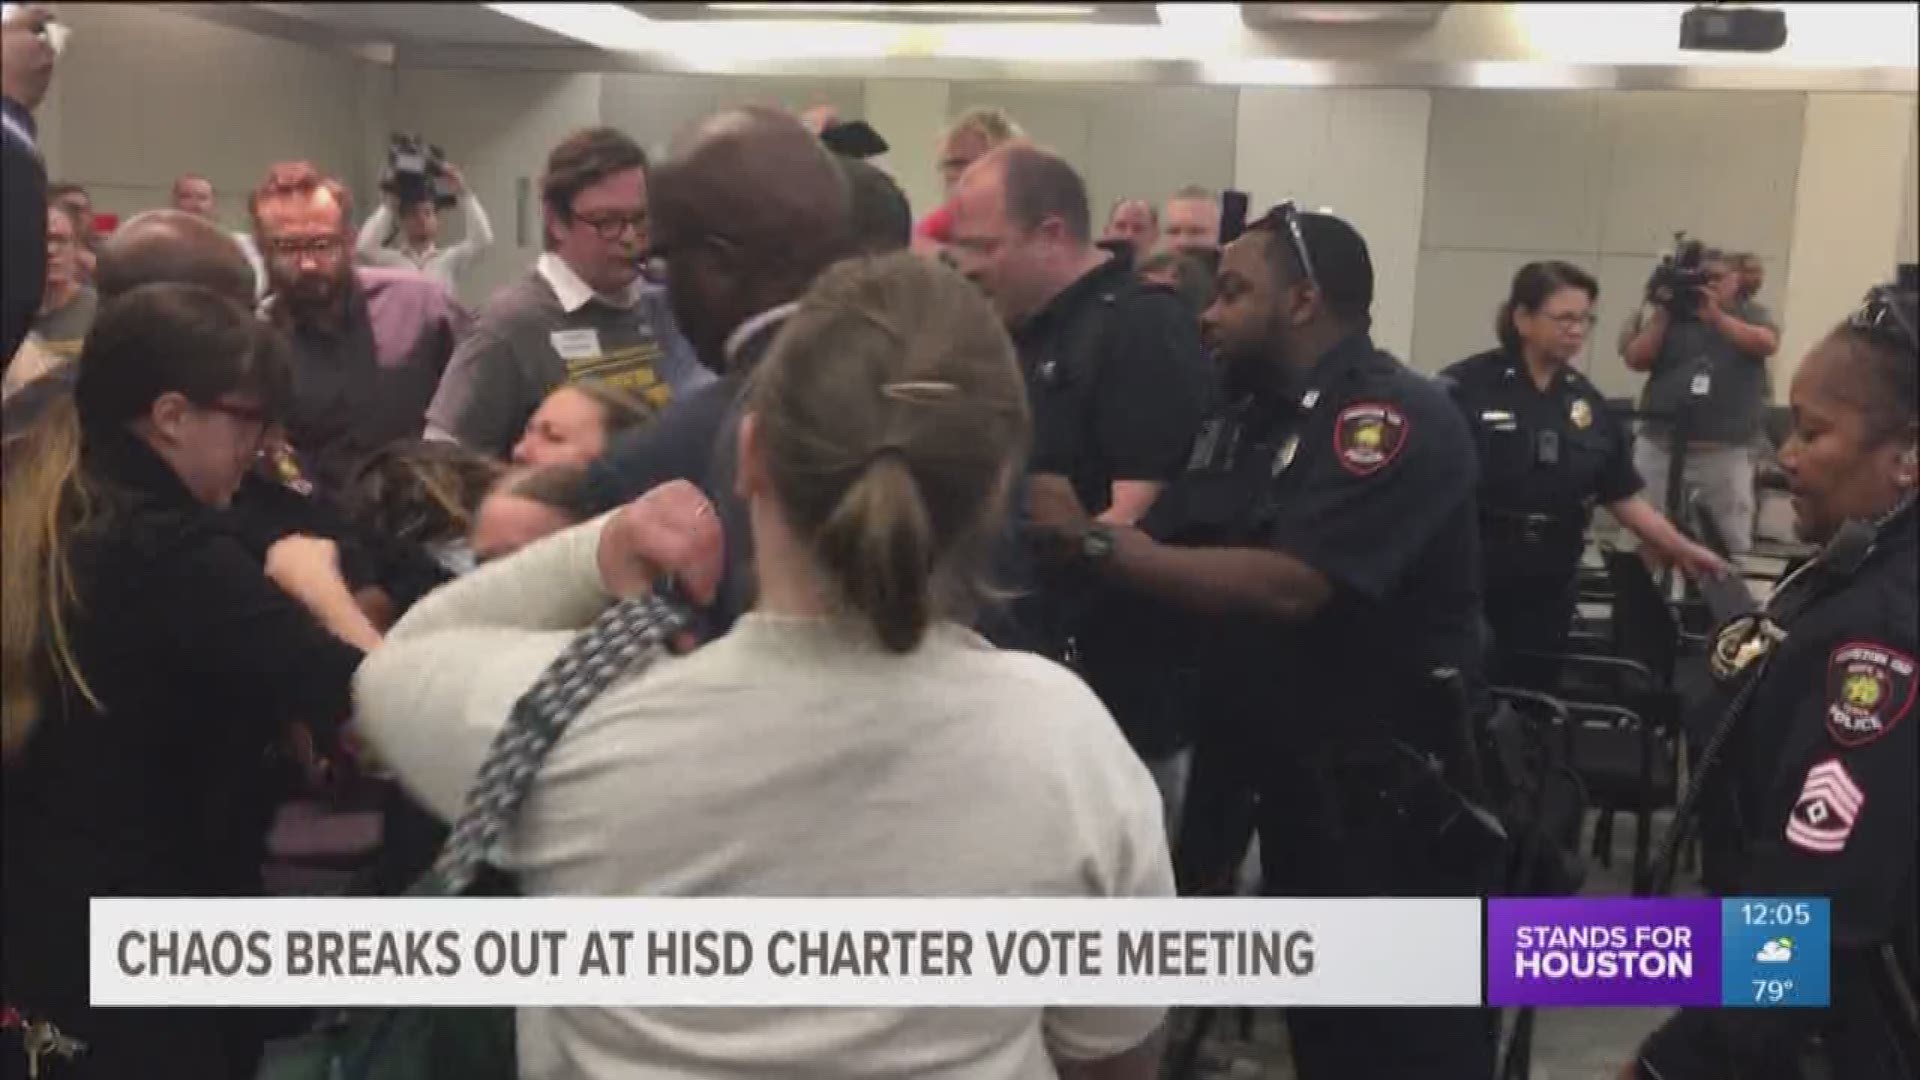 The meeting centered around a controversial vote where the board would surrender control of 10 of its struggling schools.